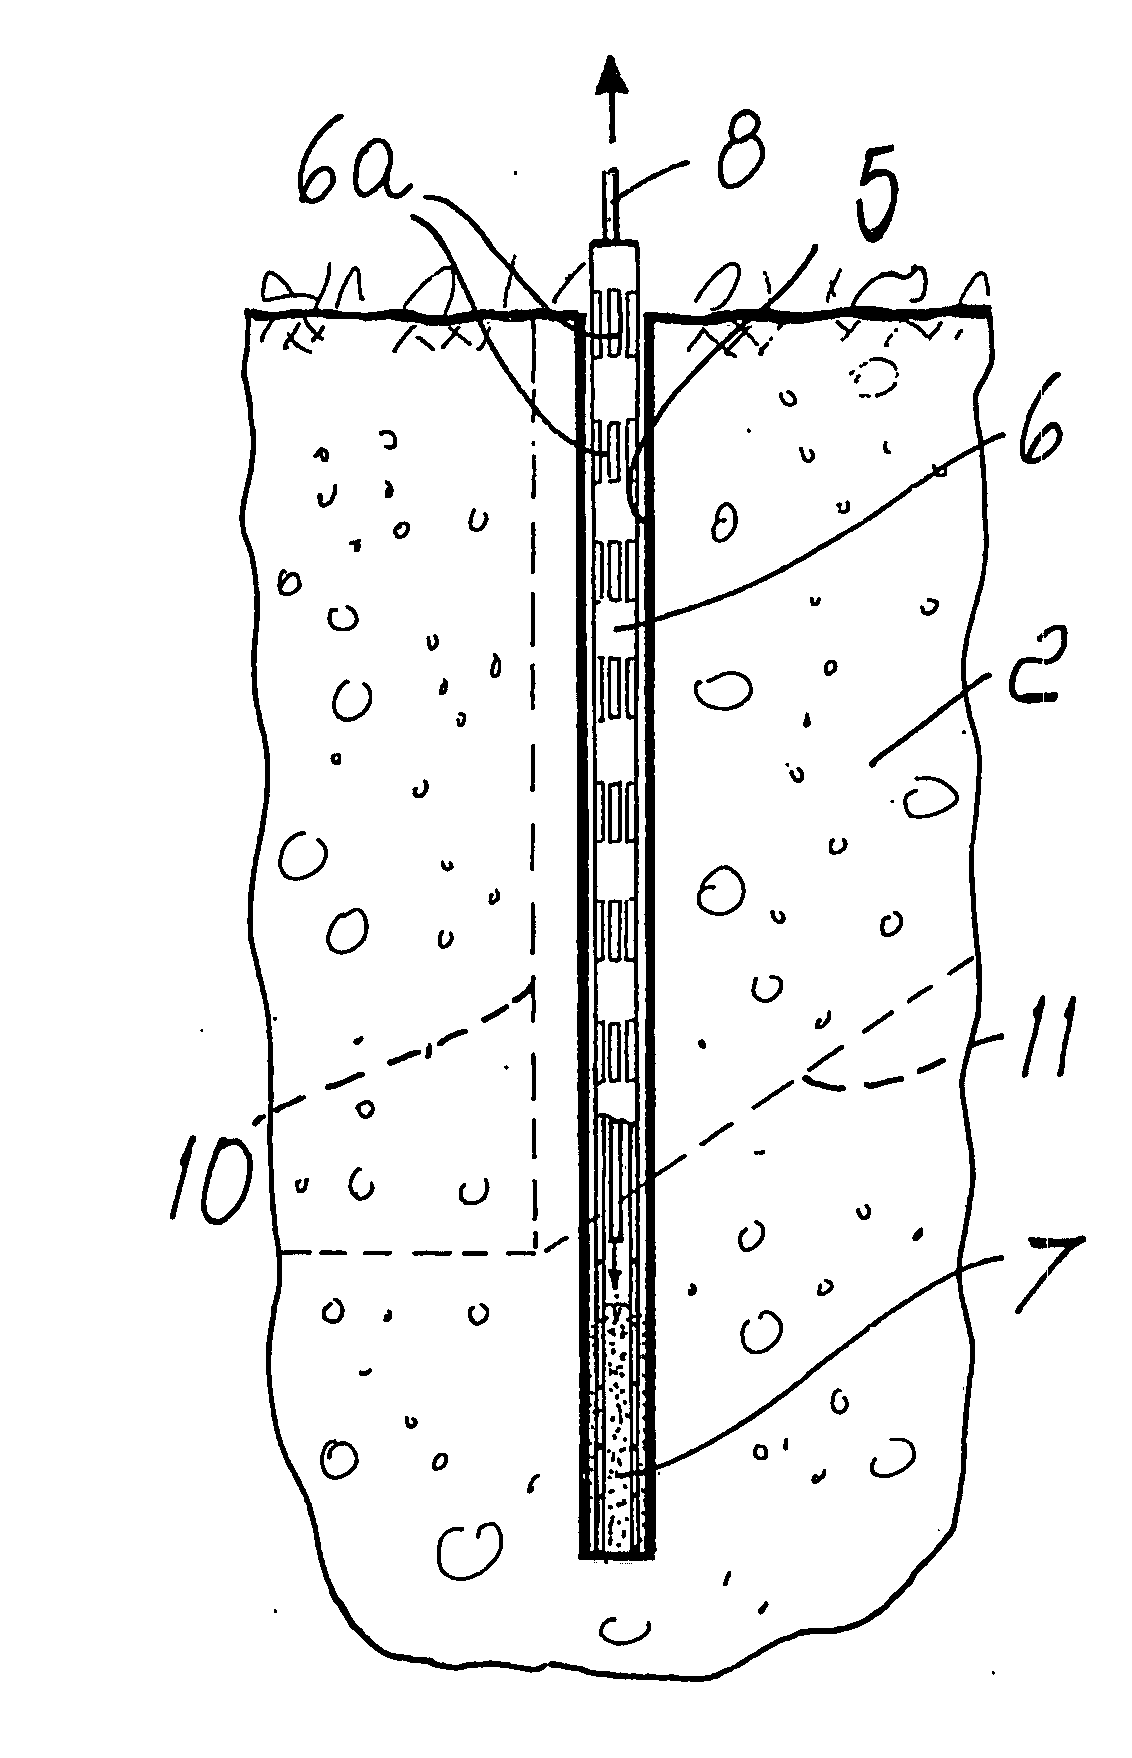 Method for increasing the strength of a volume of soil, particularly for containing and supporting excavation faces